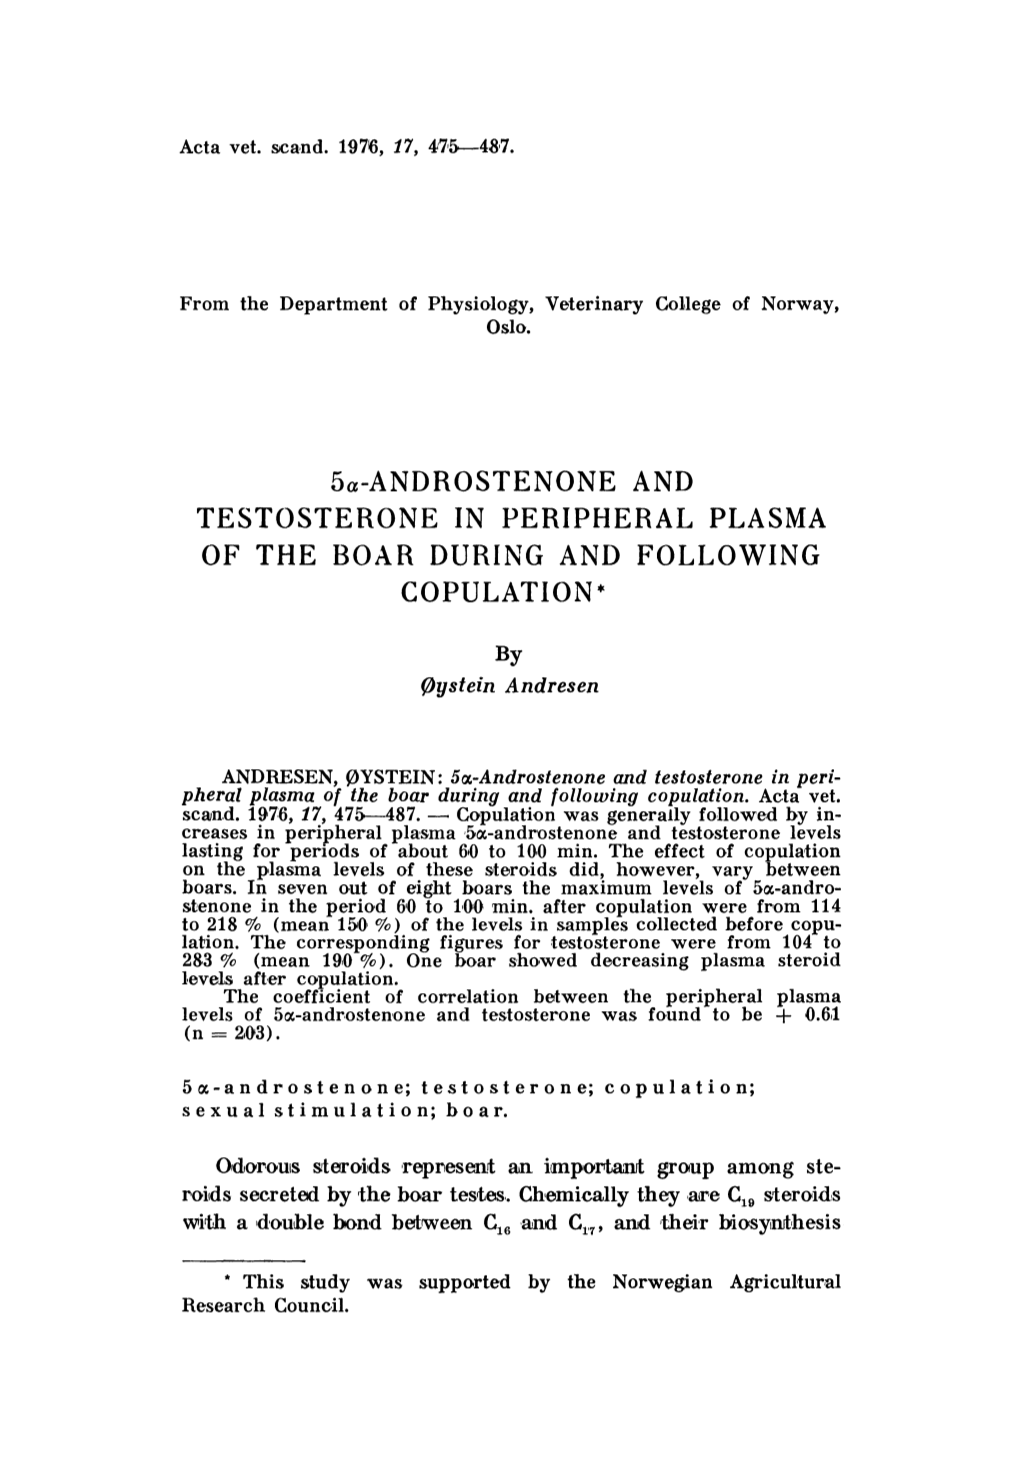 5A-ANDROSTENONE and TESTOSTERONE in PERIPHERAL PLASMA of the BOAR DURING and FOLLOWING COPULATION*